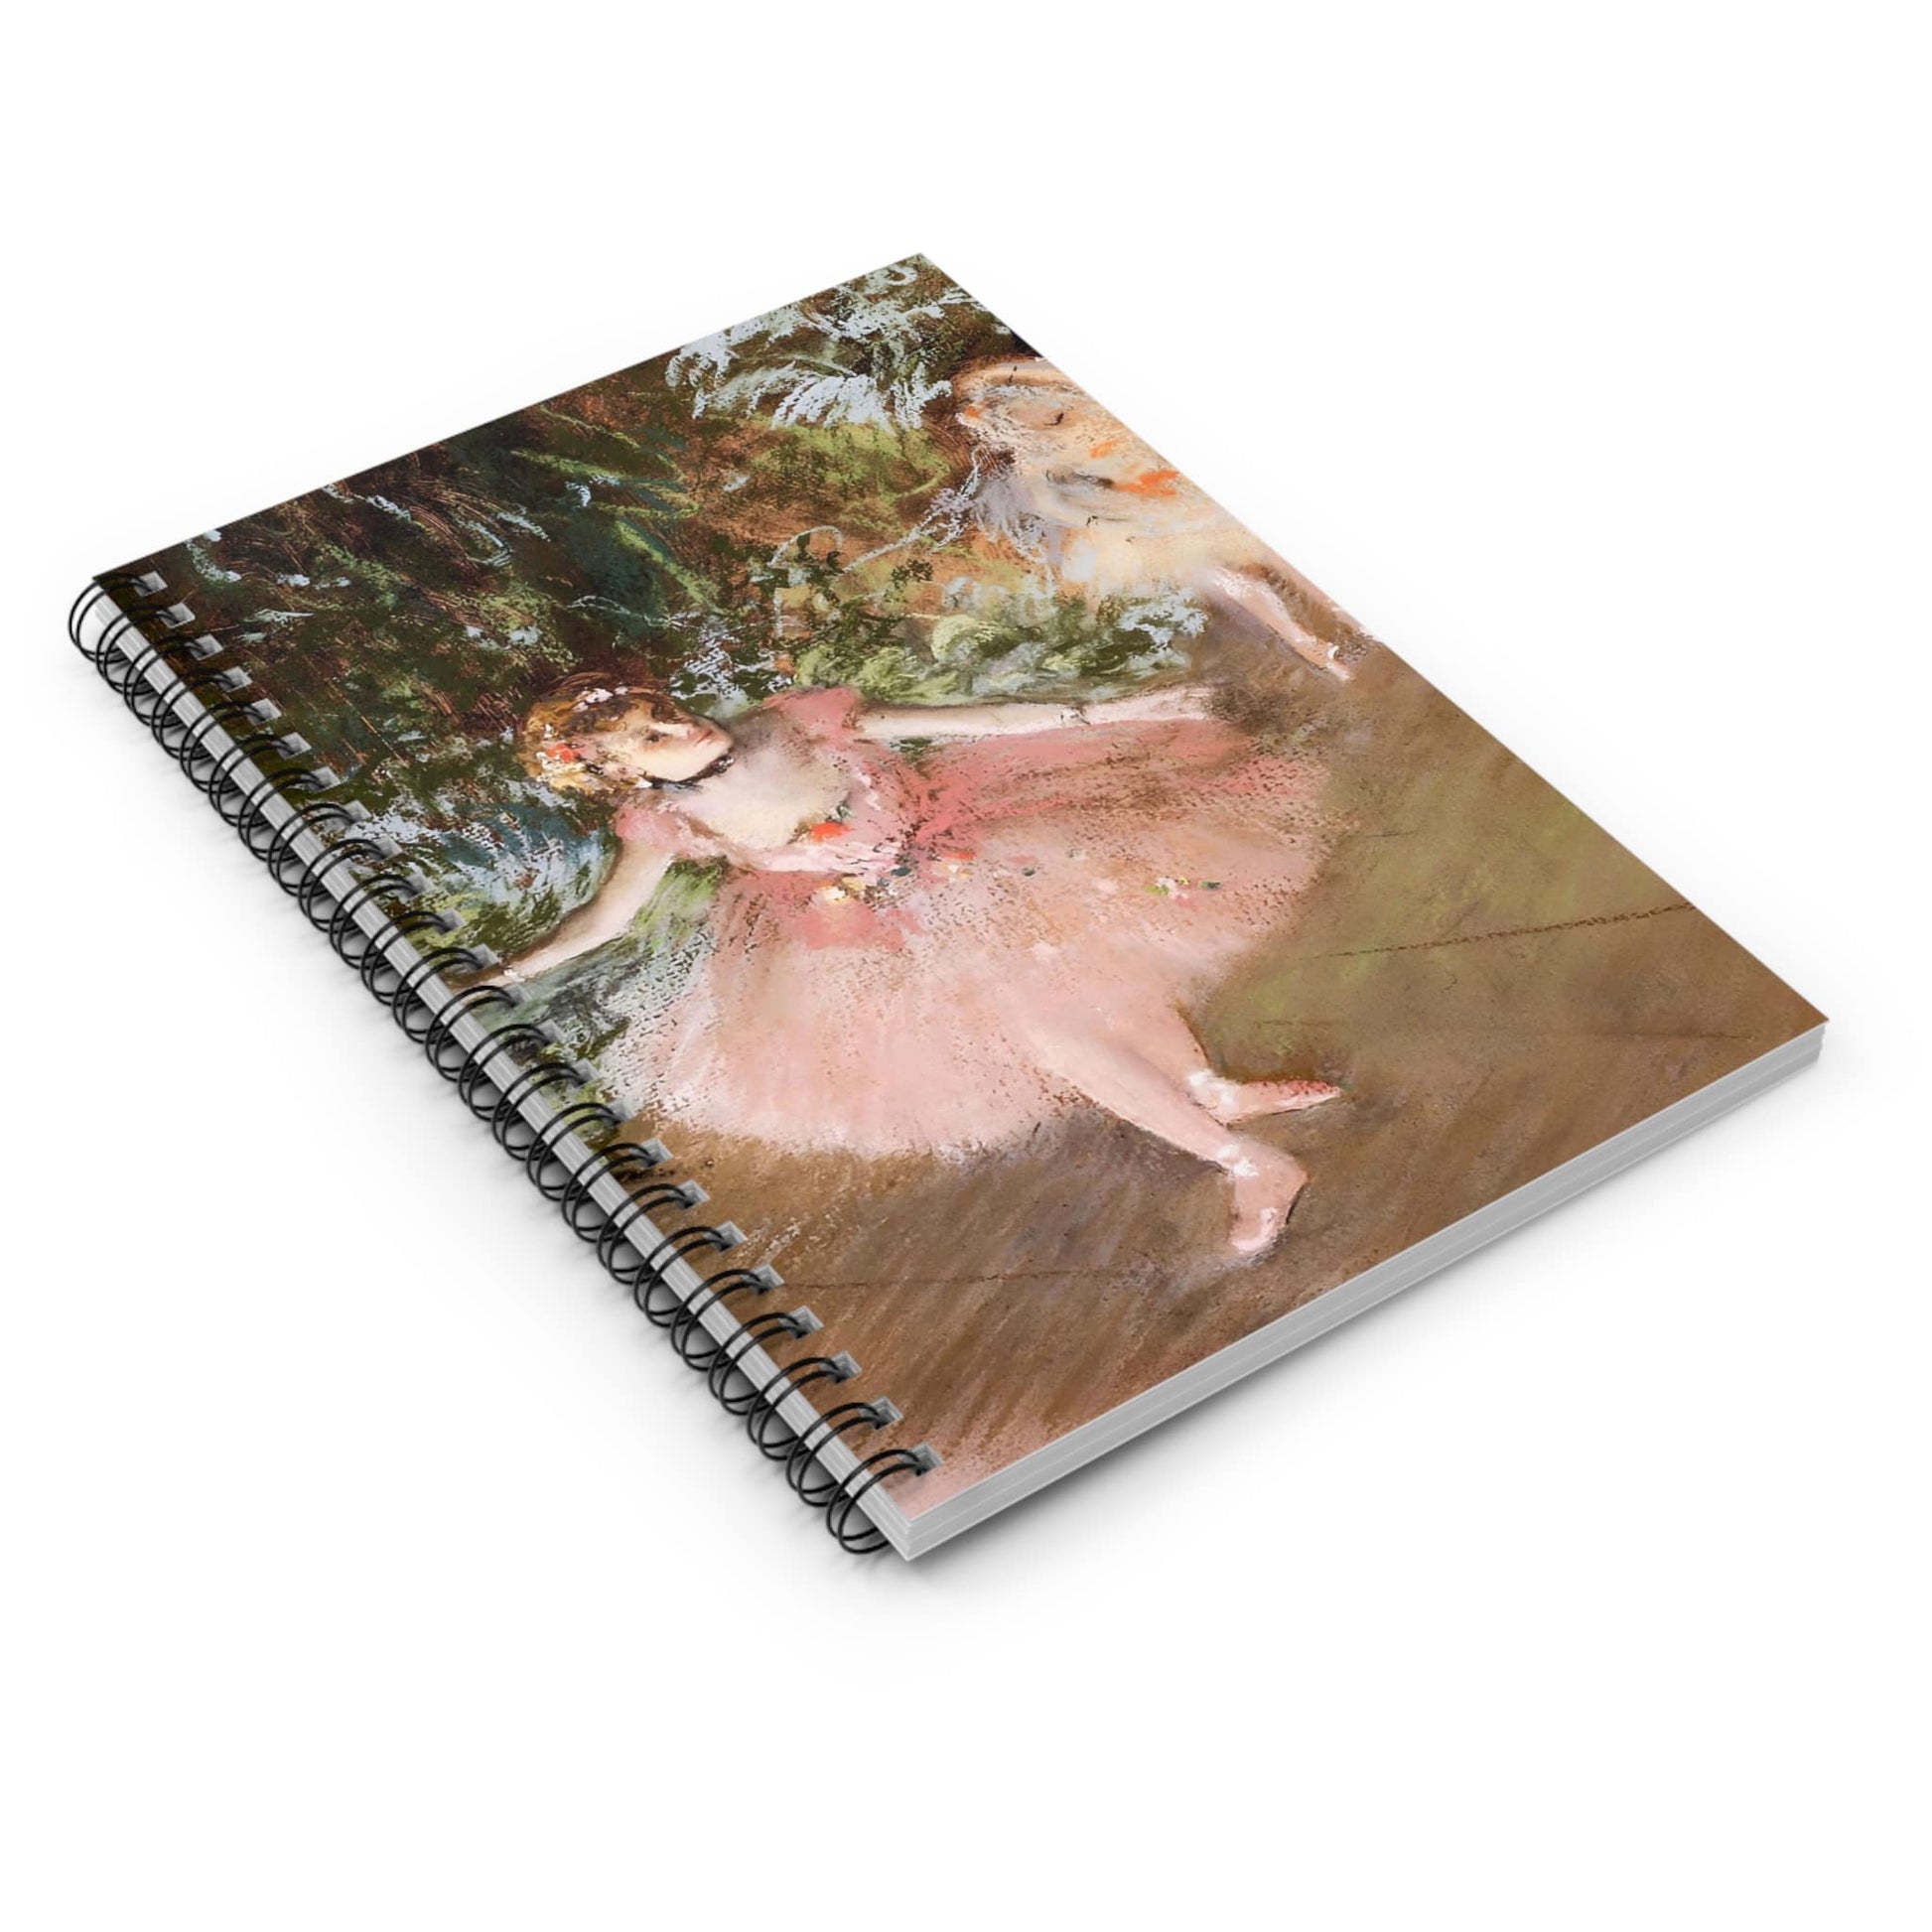 Impressionist Ballerina Spiral Notebook Laying Flat on White Surface